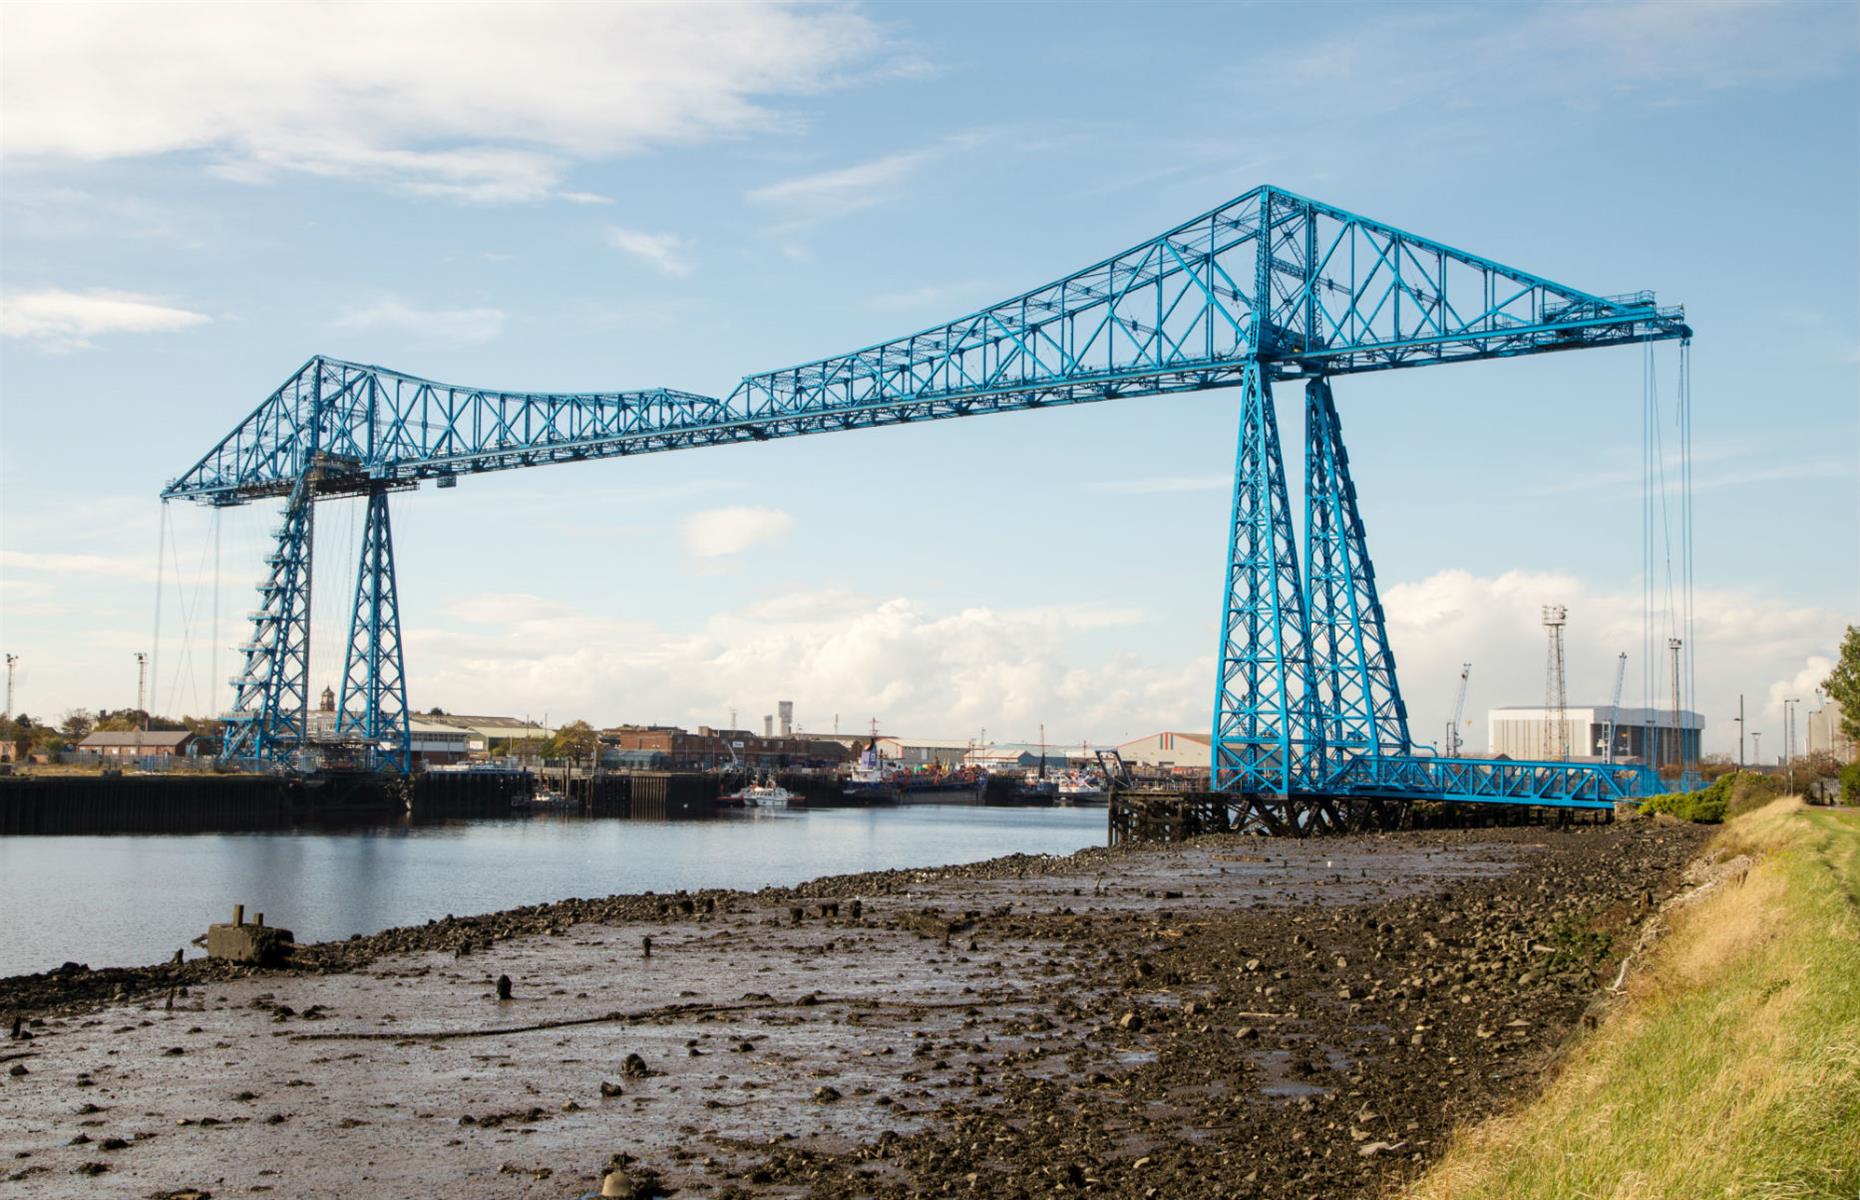 Middlesbrough's iconic transport bridge over the Tees